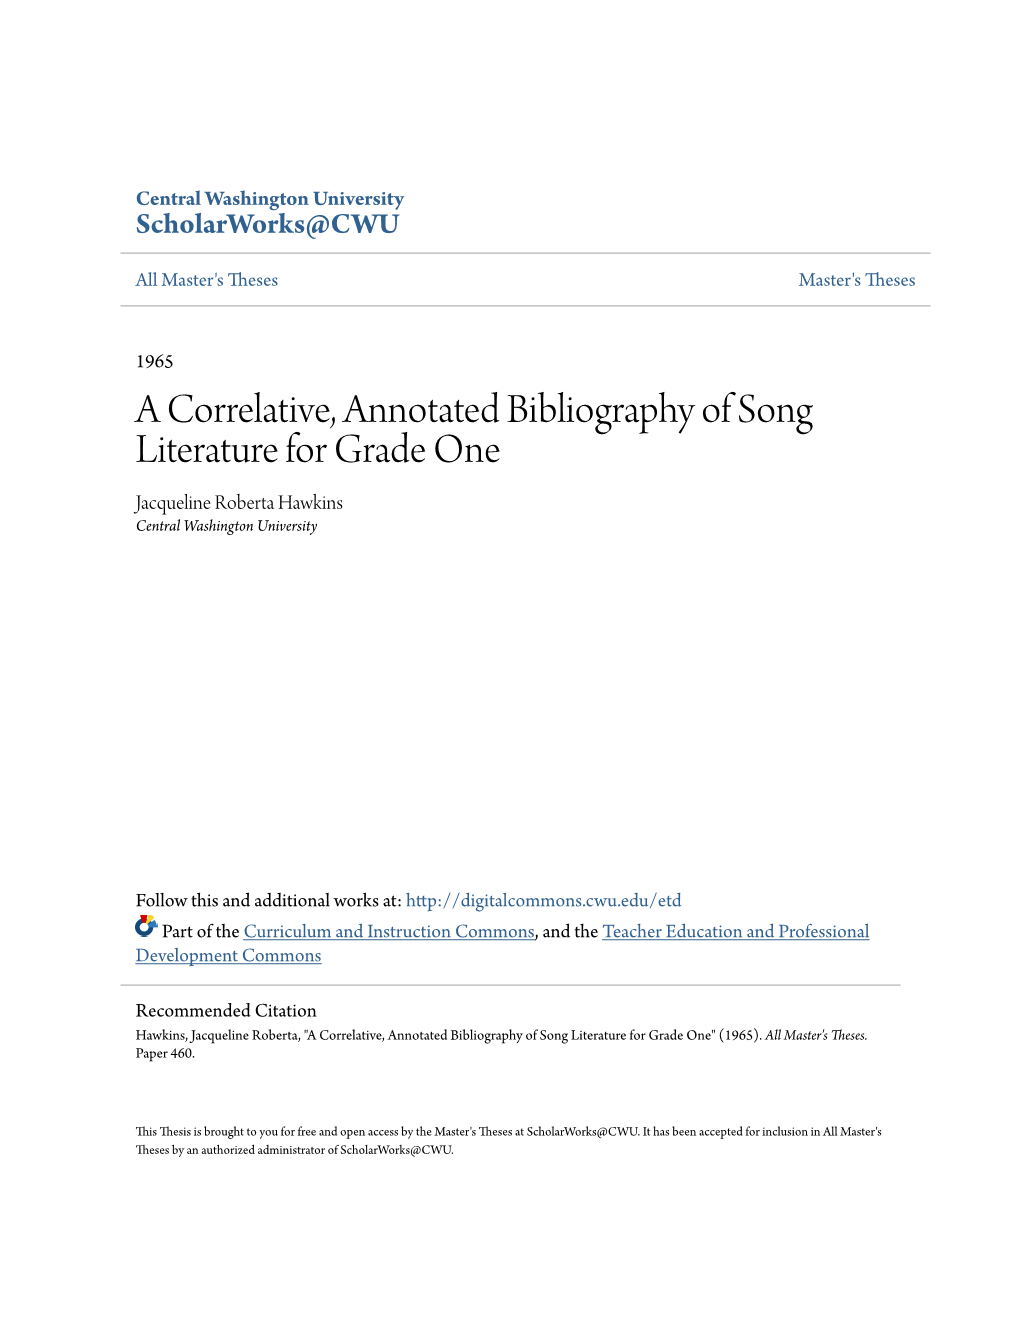 A Correlative, Annotated Bibliography of Song Literature for Grade One Jacqueline Roberta Hawkins Central Washington University